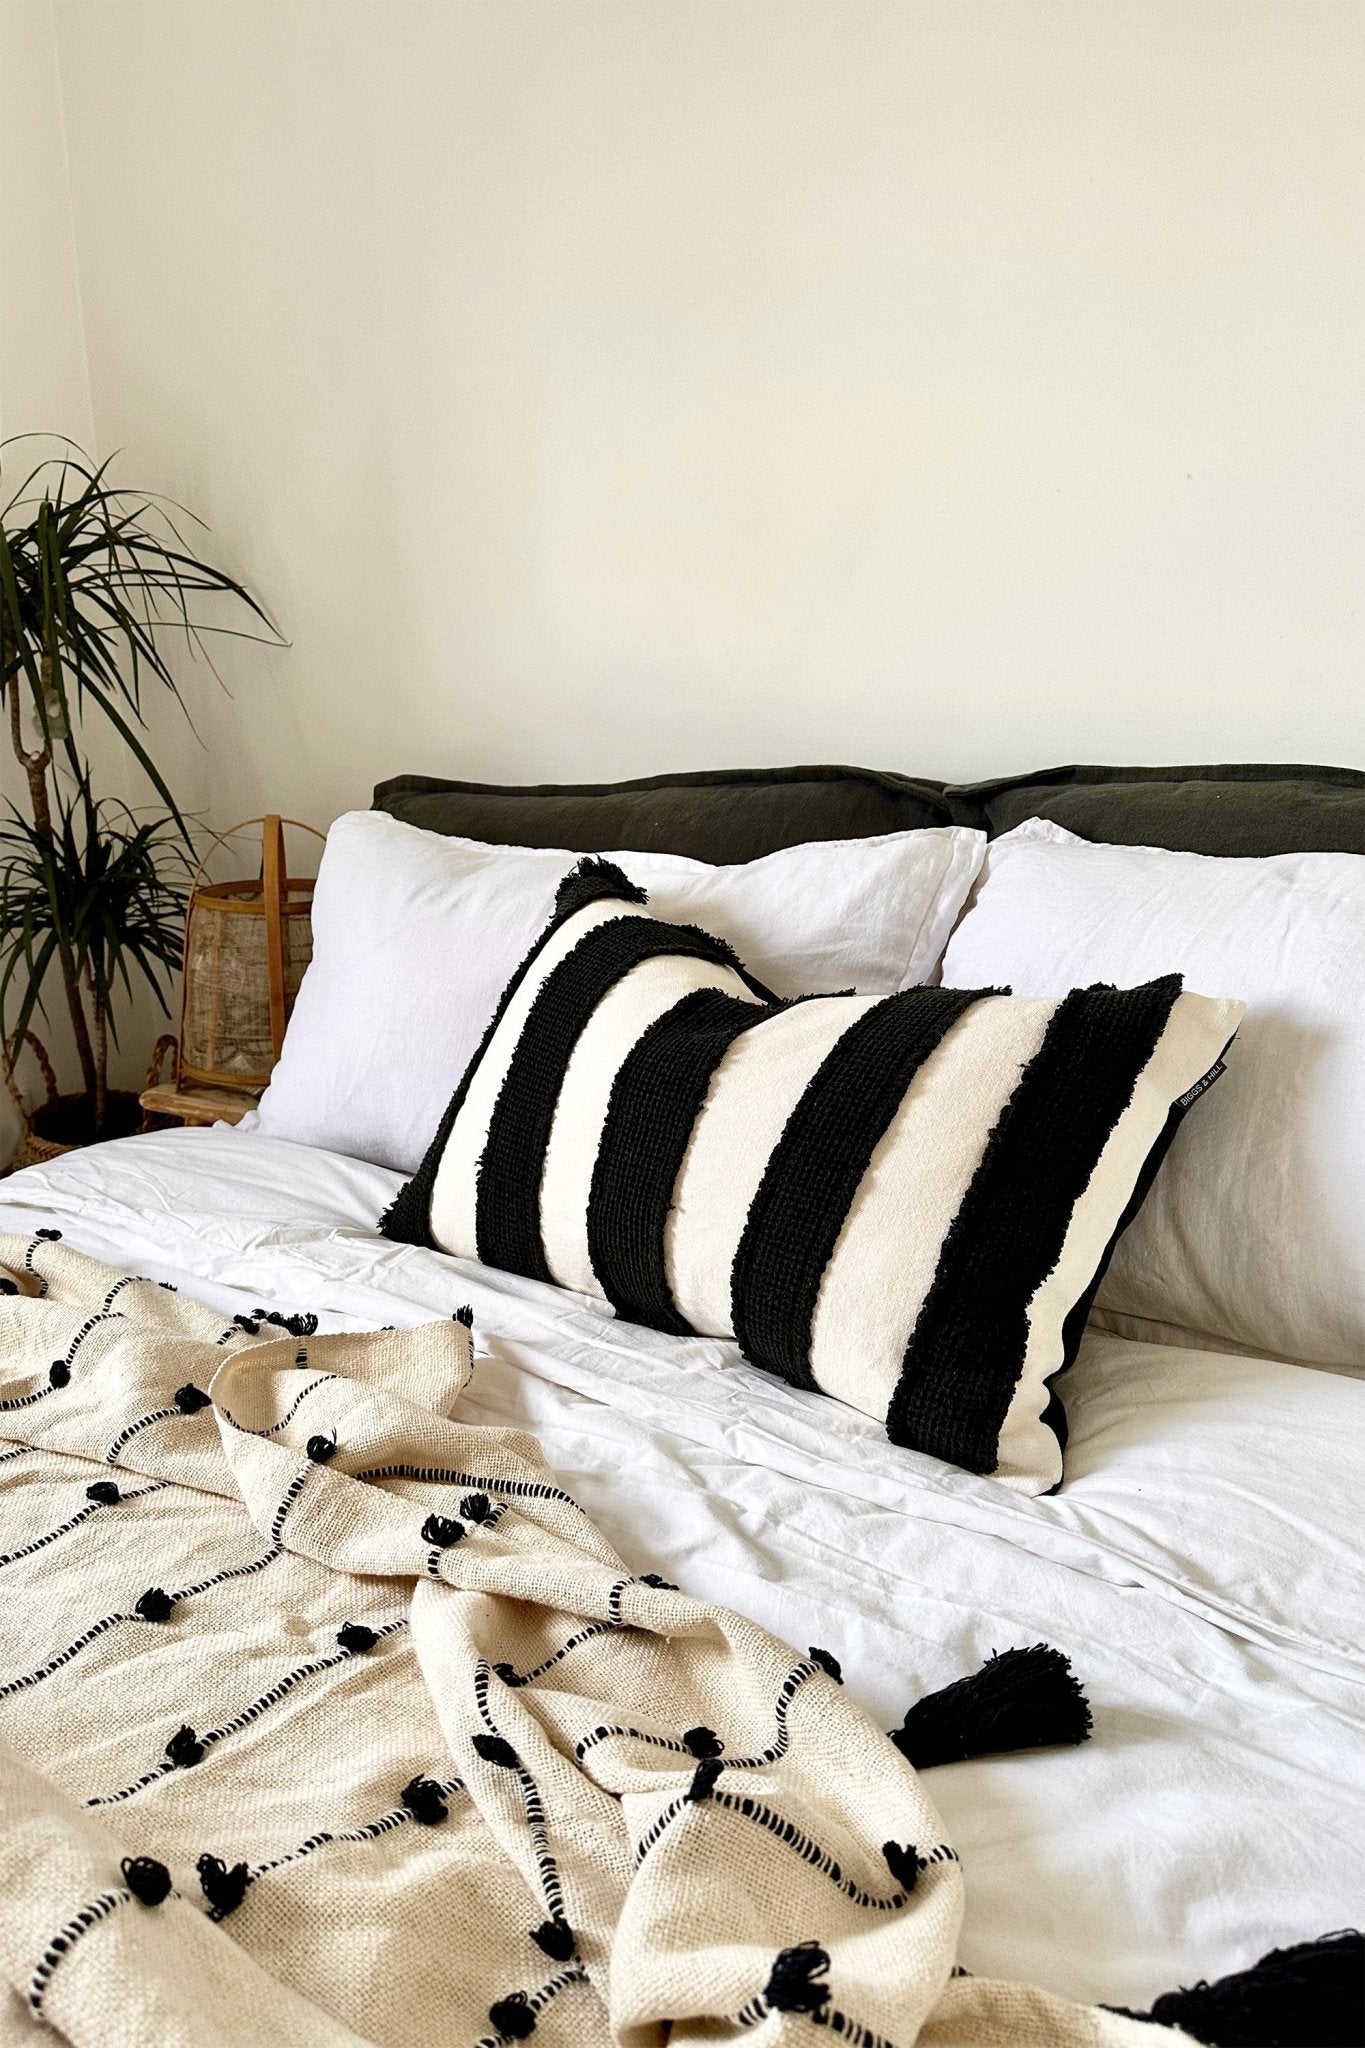 Black and White Striped Texture Linen Cushion Cover - Biggs & Hill - Cushion Covers - 16 inch - 40cm - 60cm